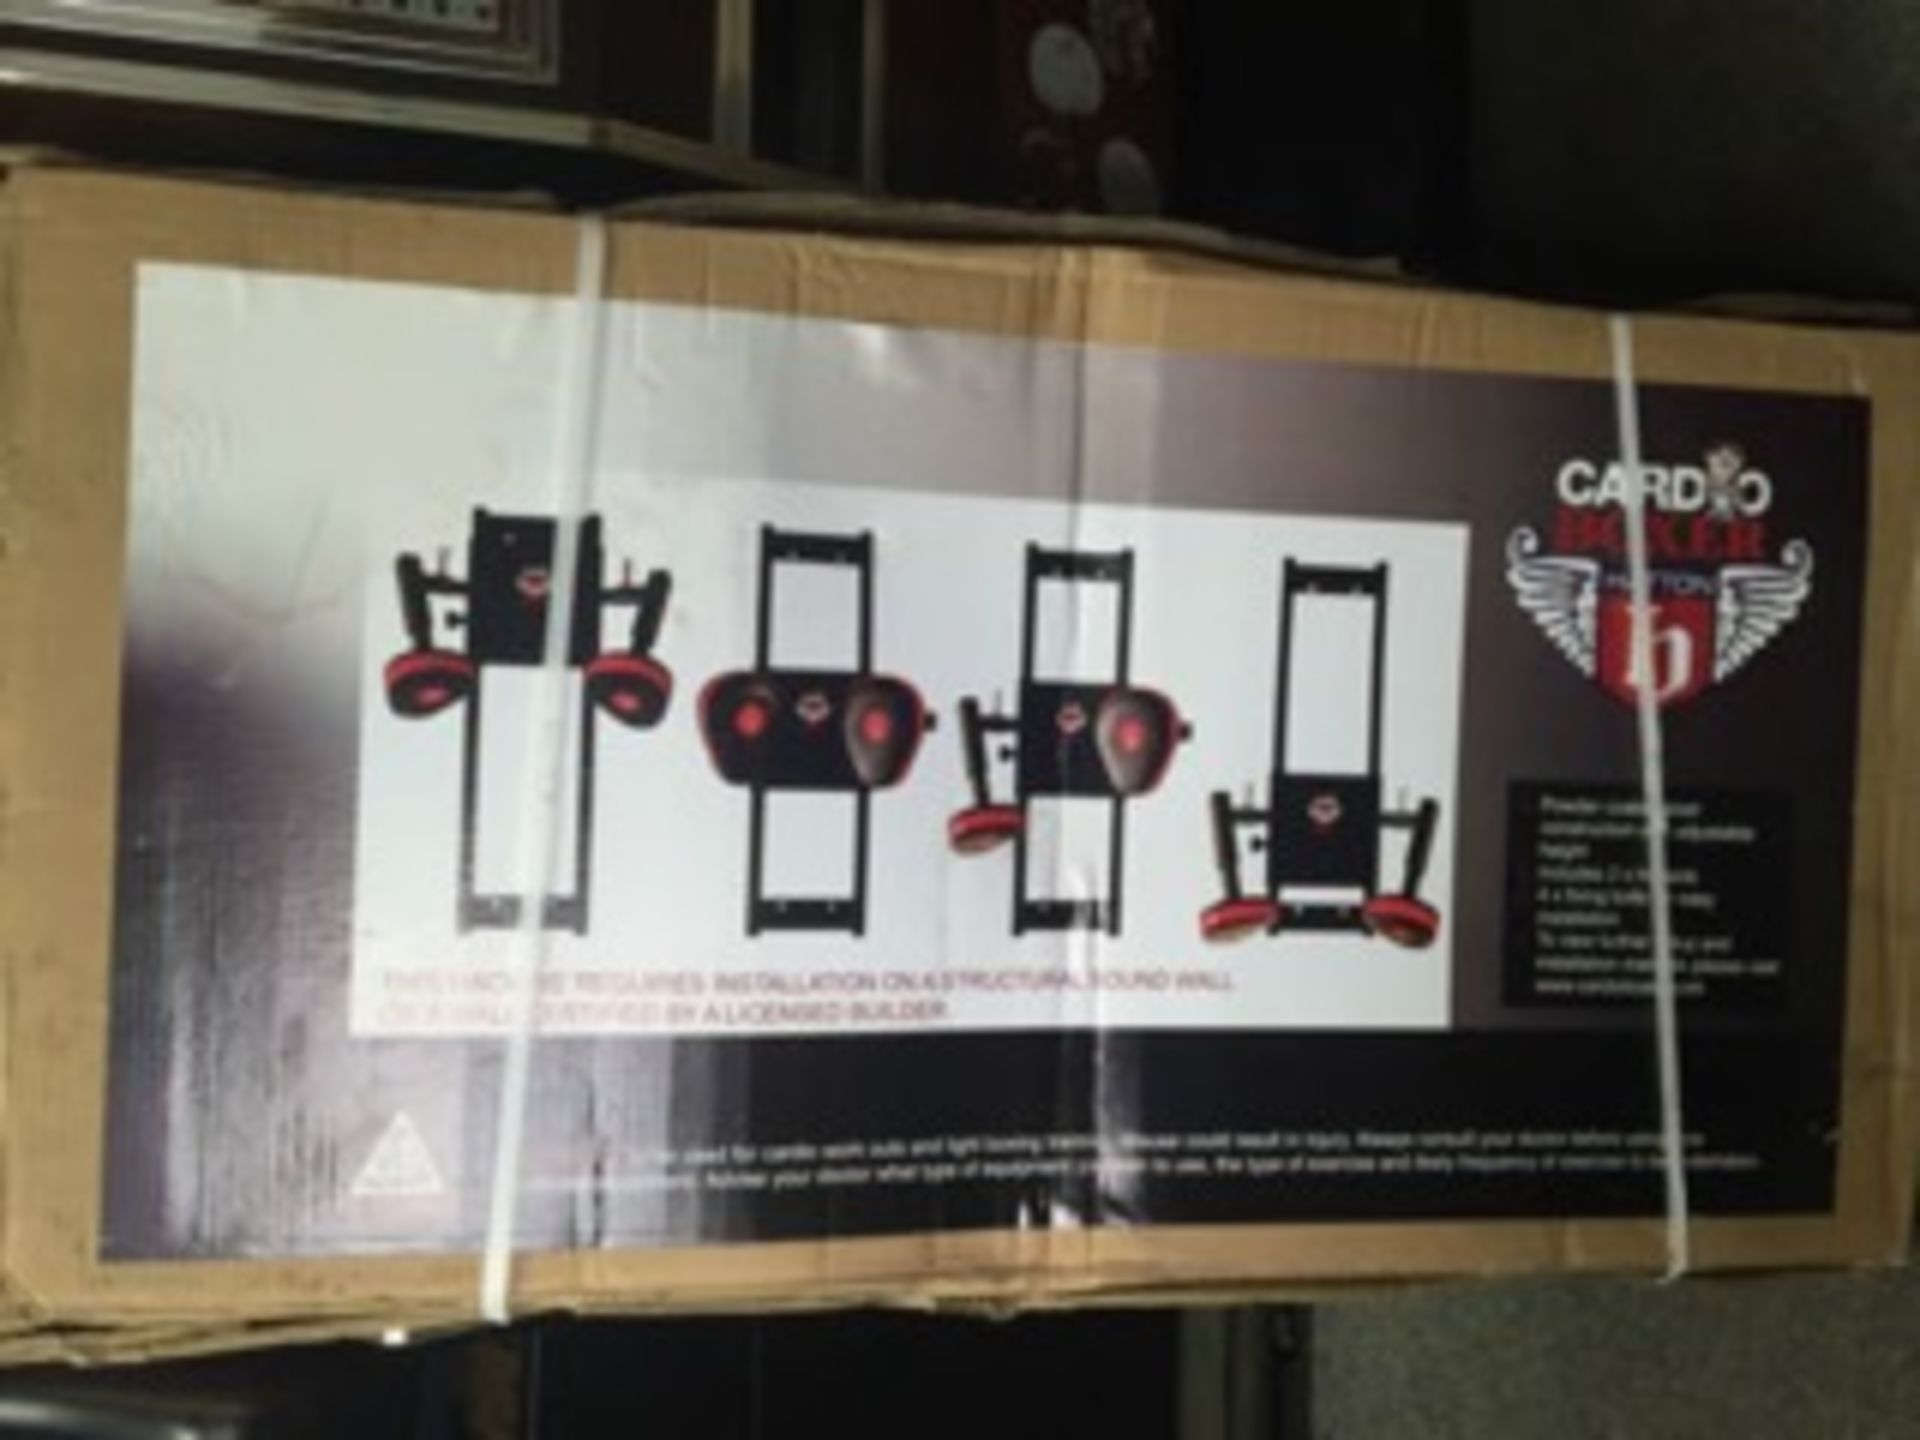 1 x Ricky Hatton CARDIO BOXER - Wall Mounted Adult Fitness Trainer - New Boxed Stock - CL053 - - Image 4 of 5